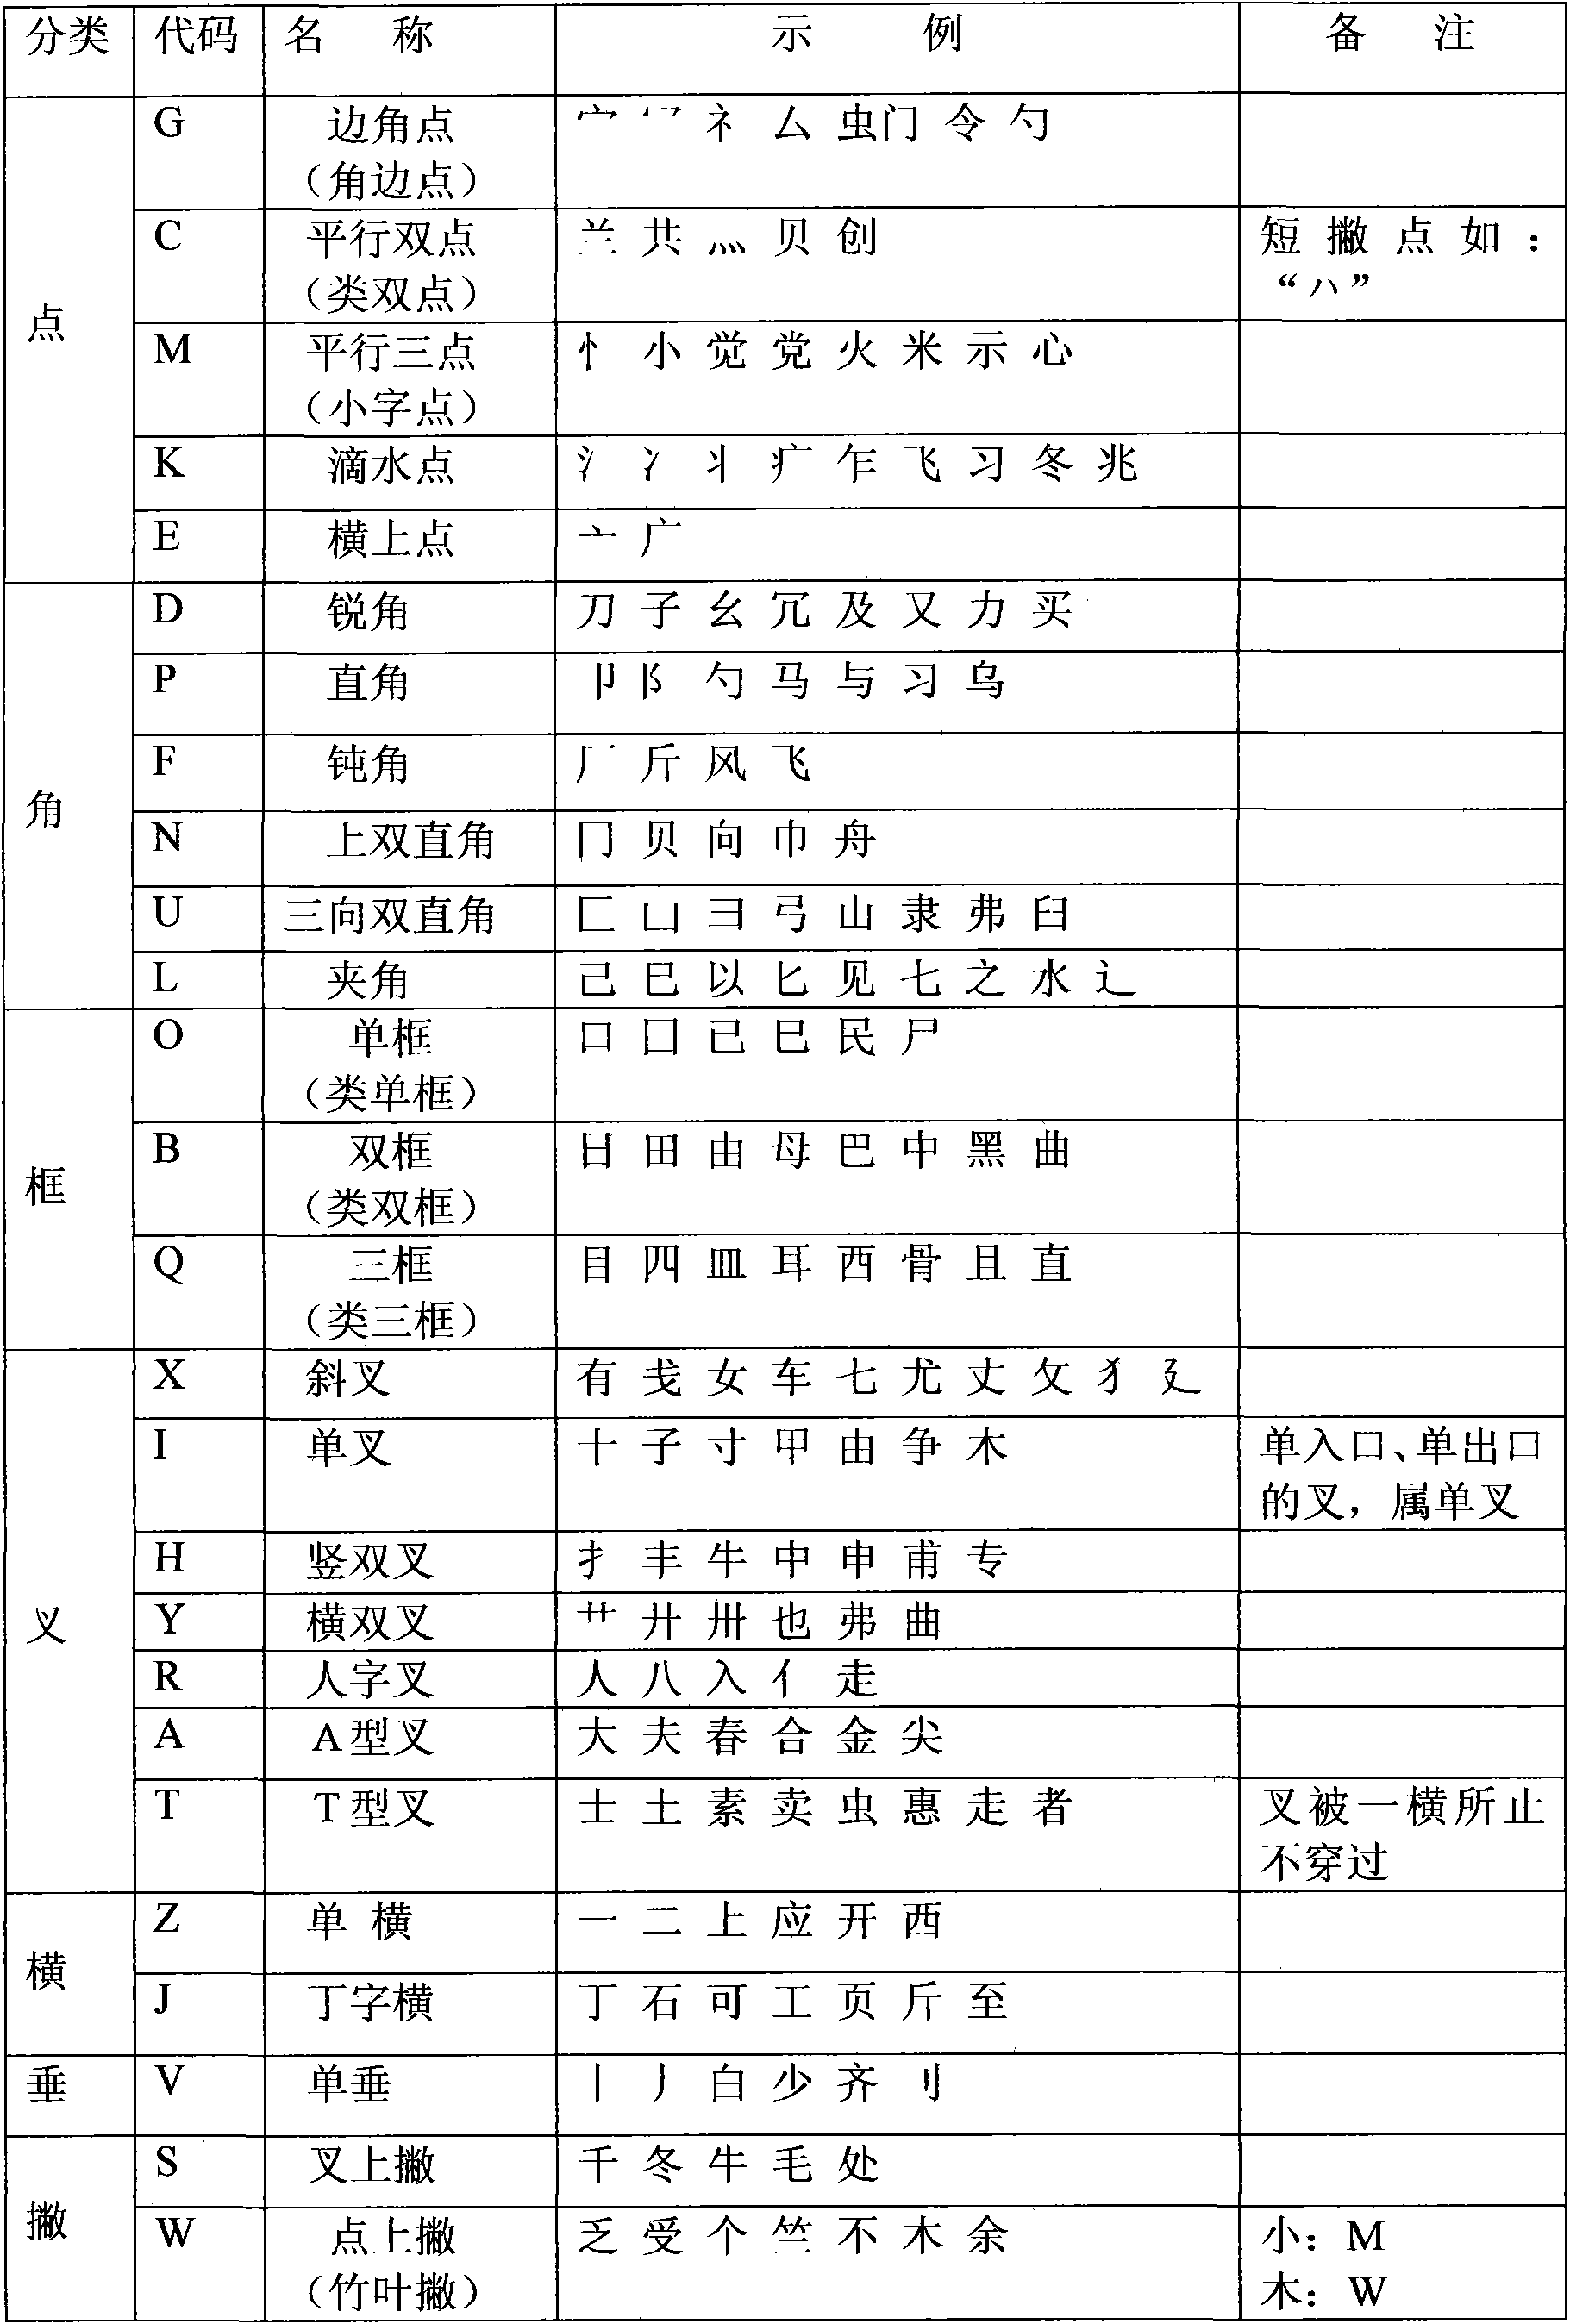 Universal Chinese character input method for traditional and simplified Chinese characters by scanning sides and corners